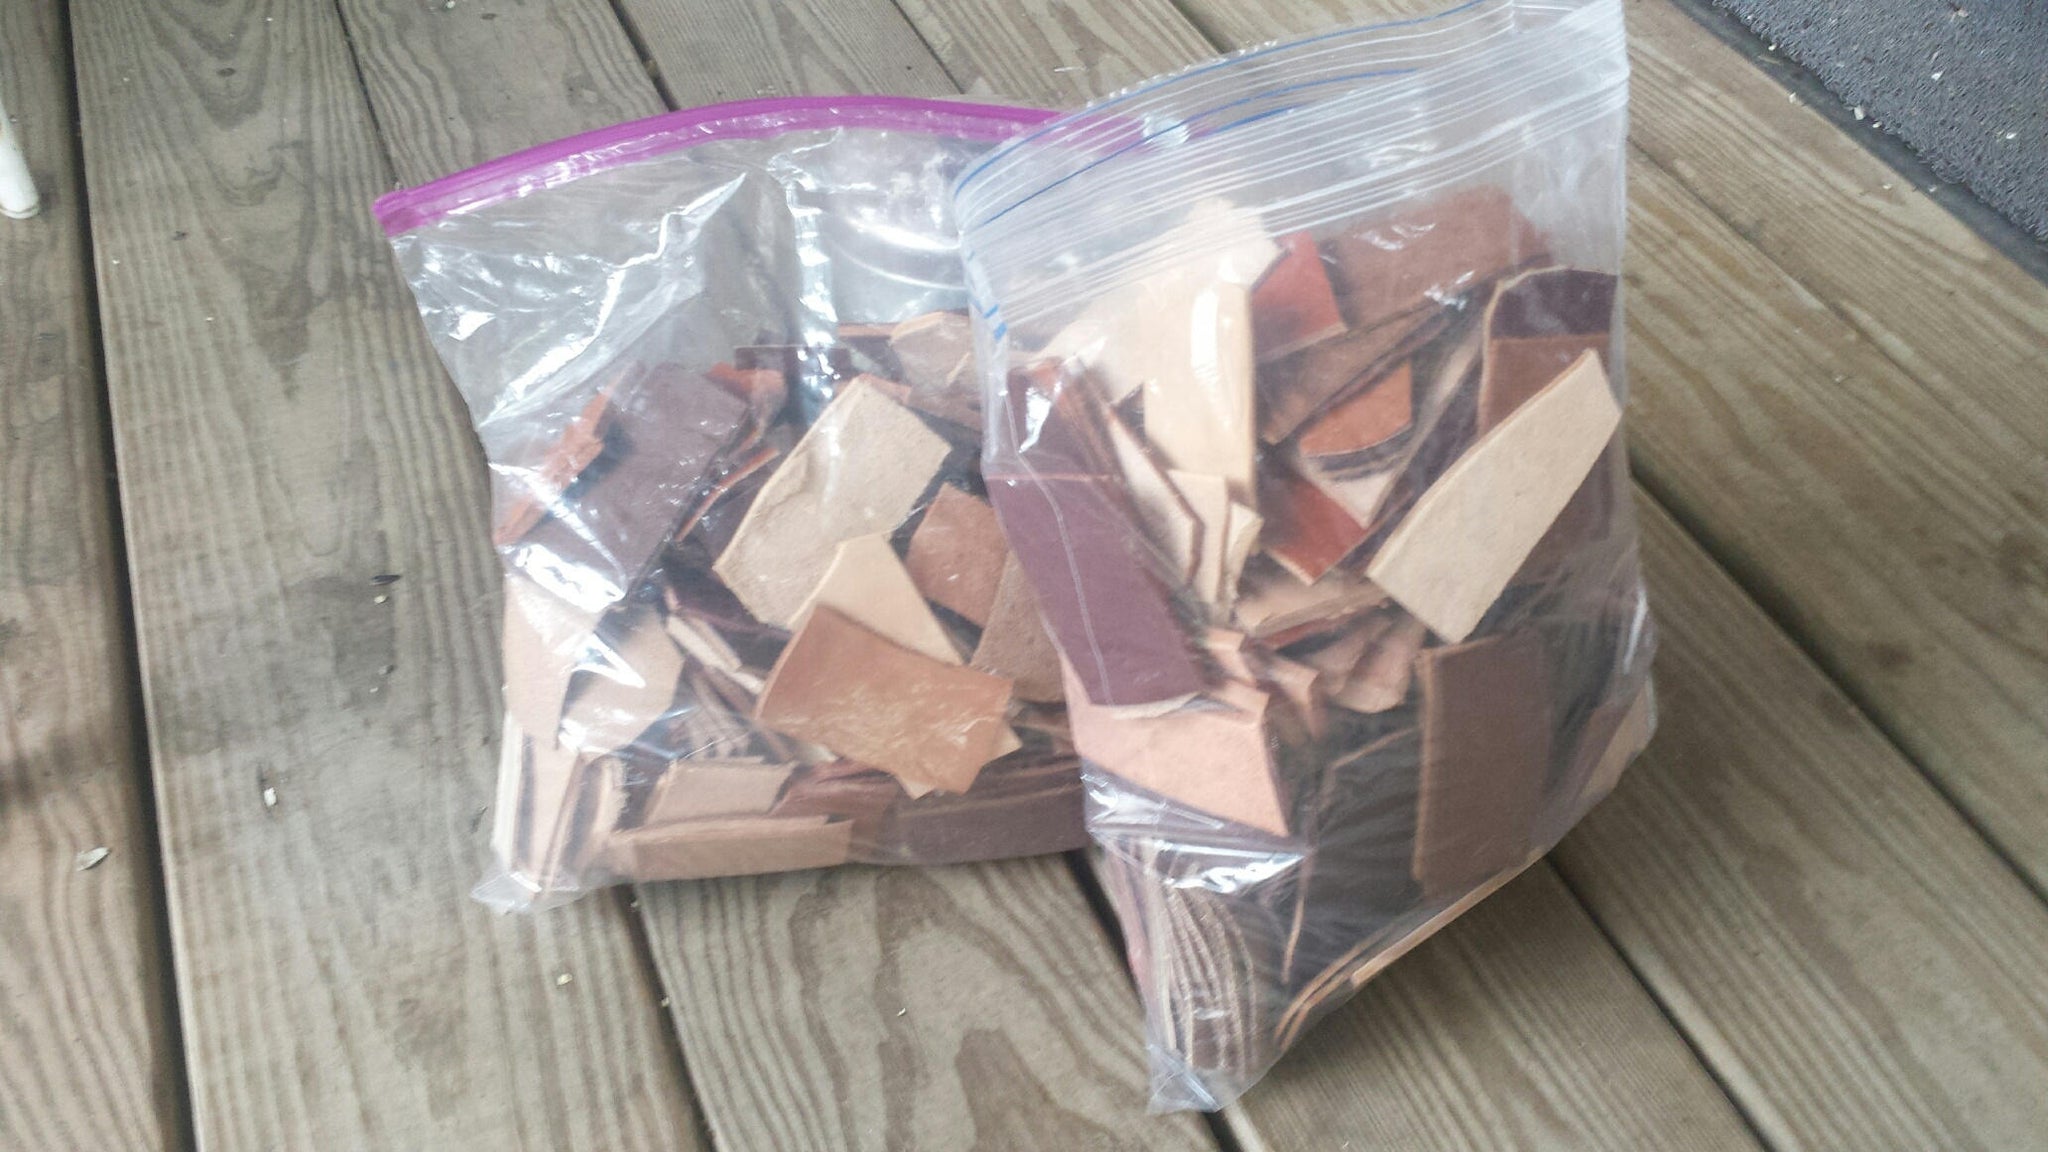  Leather Scraps for Crafting, Leather Working, Jewelry